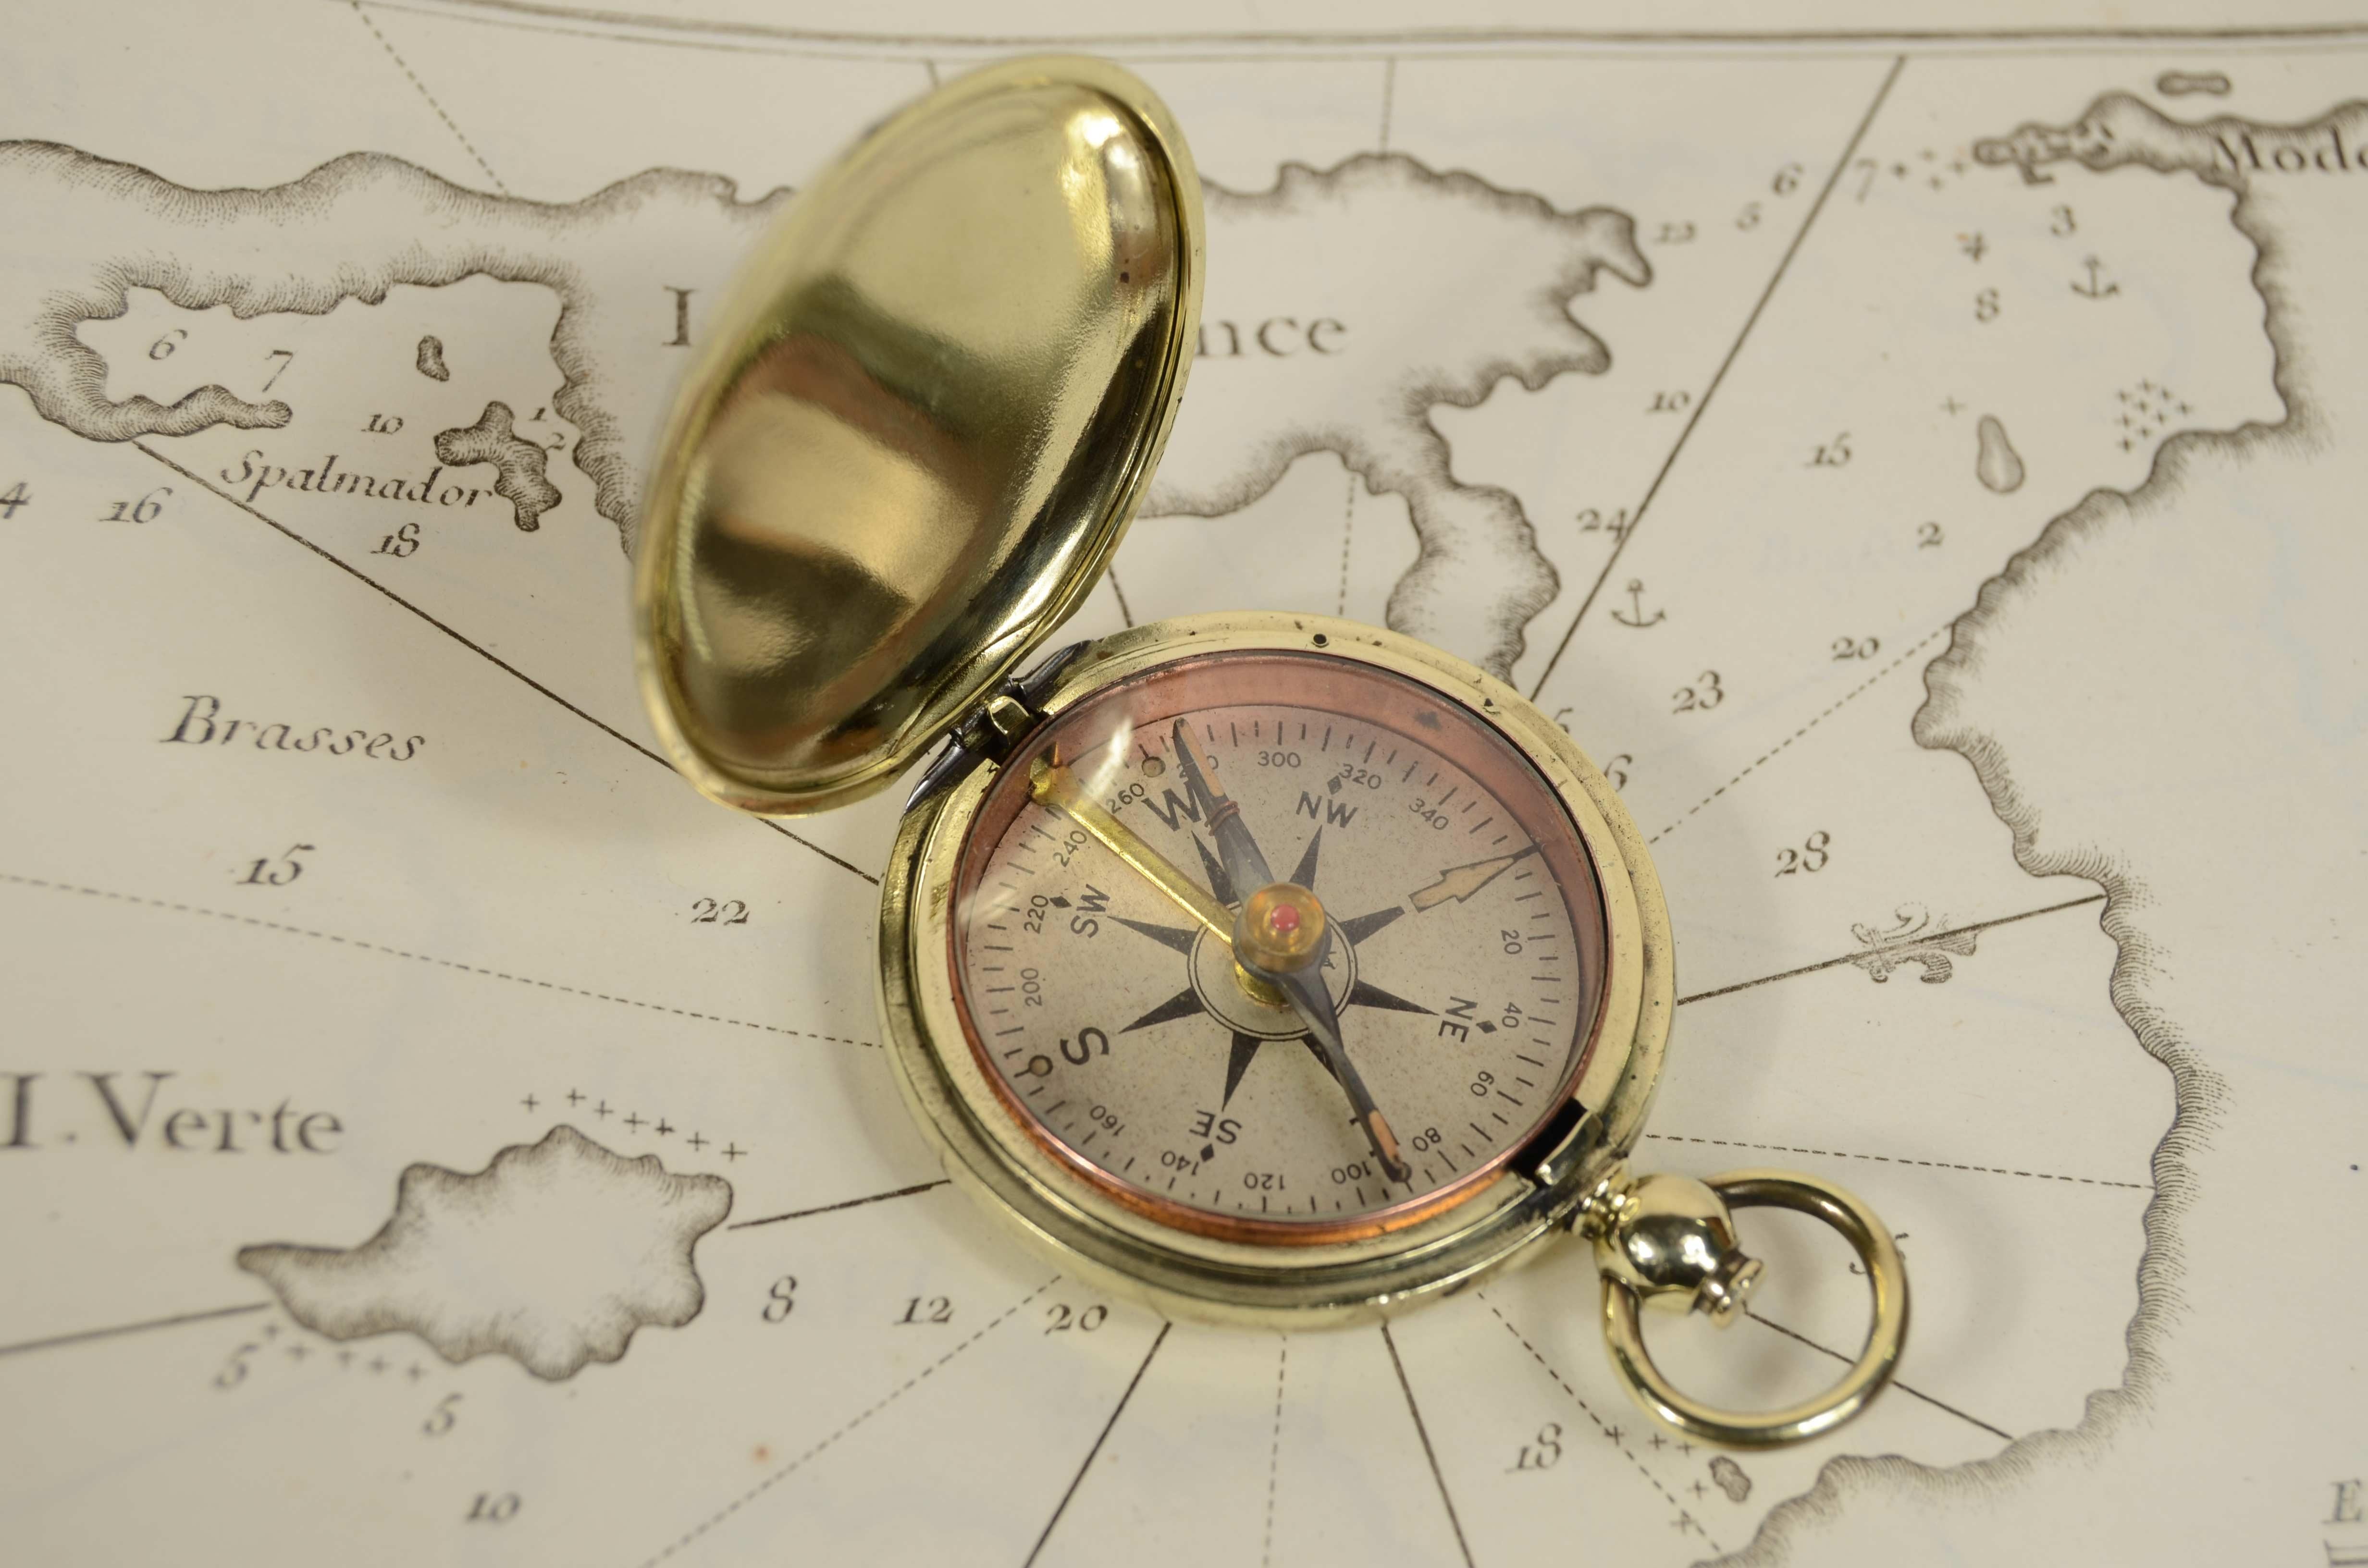 Small brass travel compass, issued to the U.S. Army during World War I, shaped like an onion pocket watch, an instrument consisting of a magnetized needle free to rotate in a horizontal plane marking the direction of magnetic north. Signed Taylor.